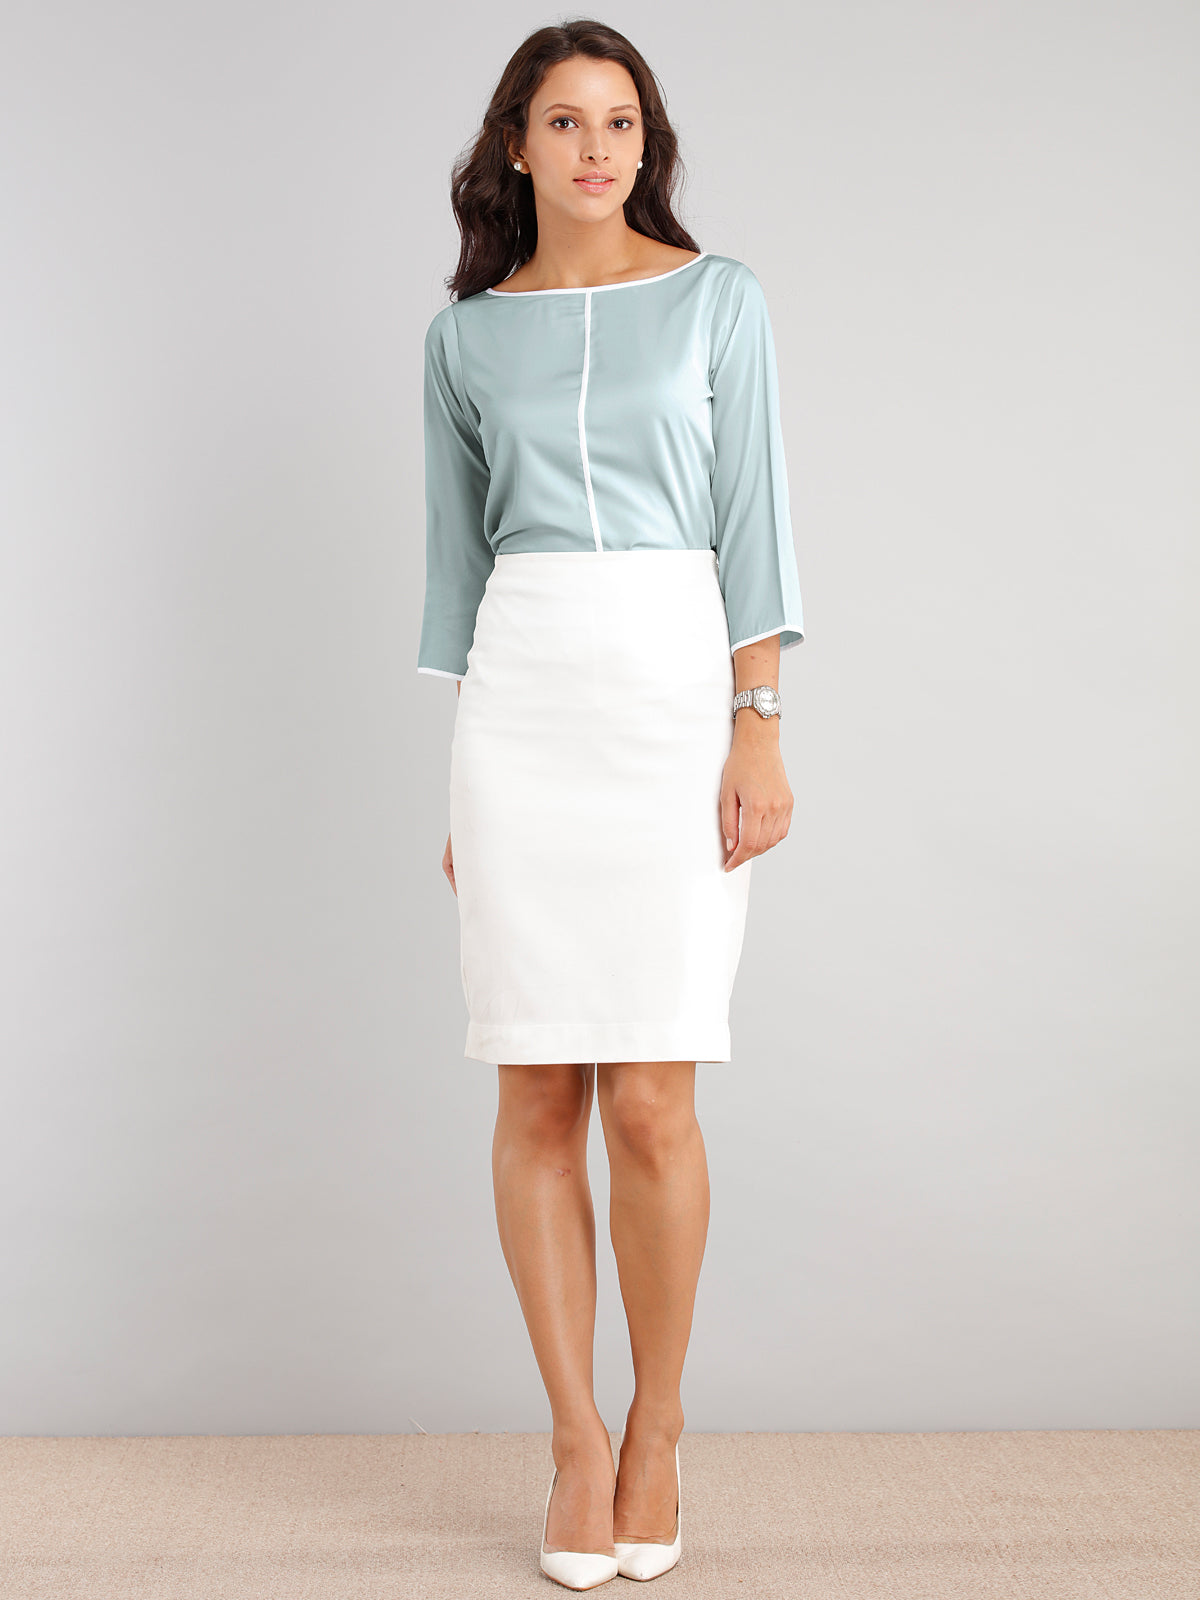 Boat Neck Top - Teal